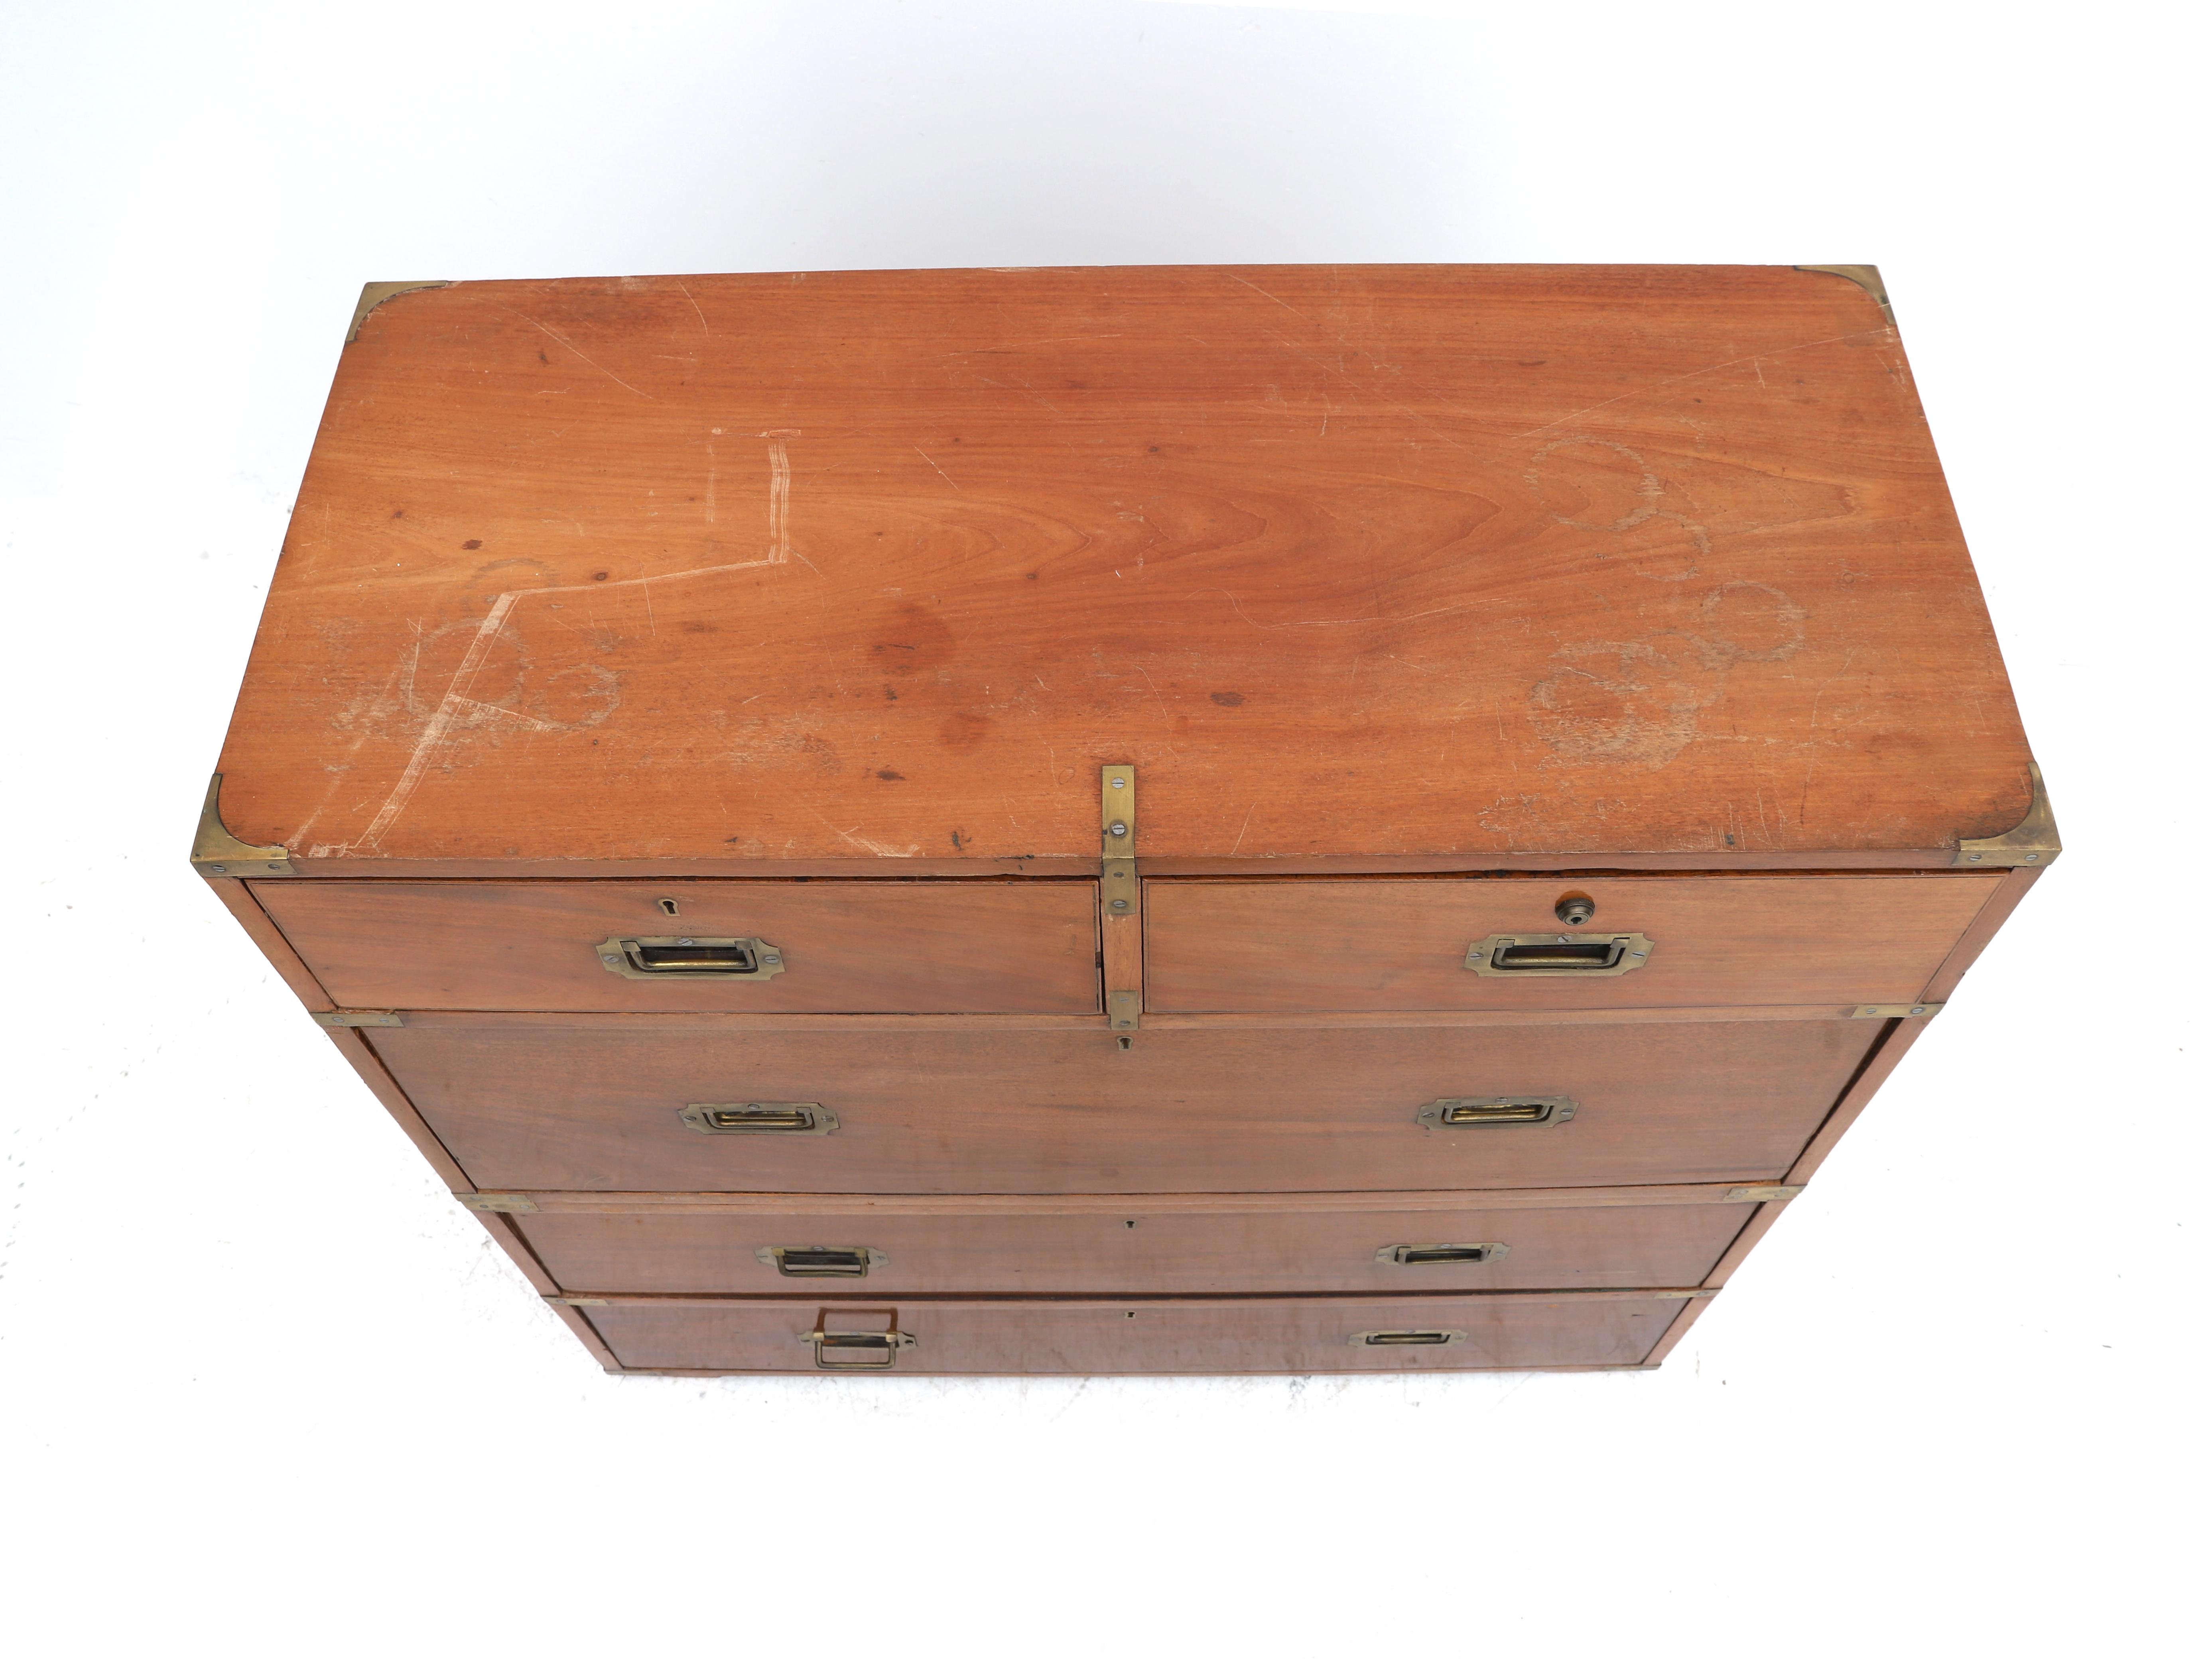 A Camphor Campaign chest of drawers signed on the lock of the right drawer of the top row, Bramah - Image 4 of 4